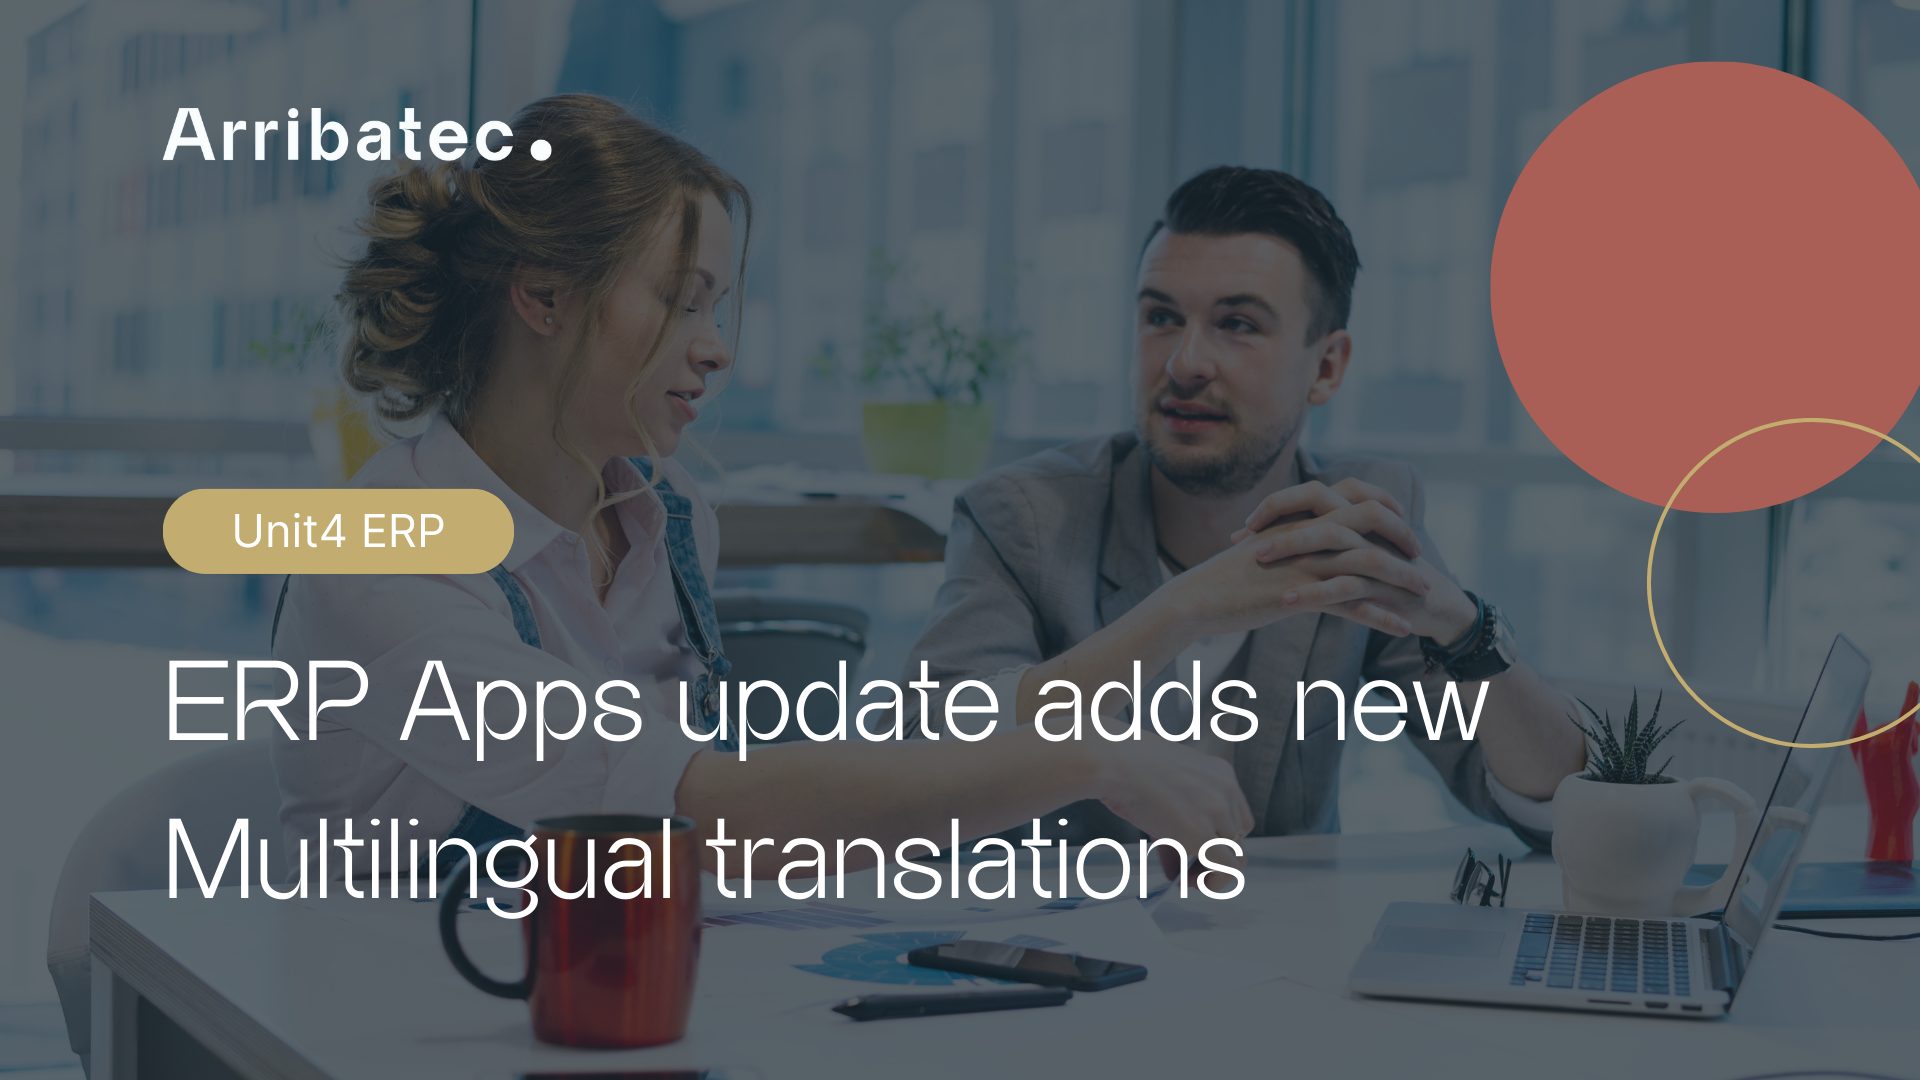 ERP- APPs’ Portals have helped companies across World to revolutionise how they use their ERP systems and now, thanks to their latest updates, they’re able to offer that ability to the non-English speaking world.